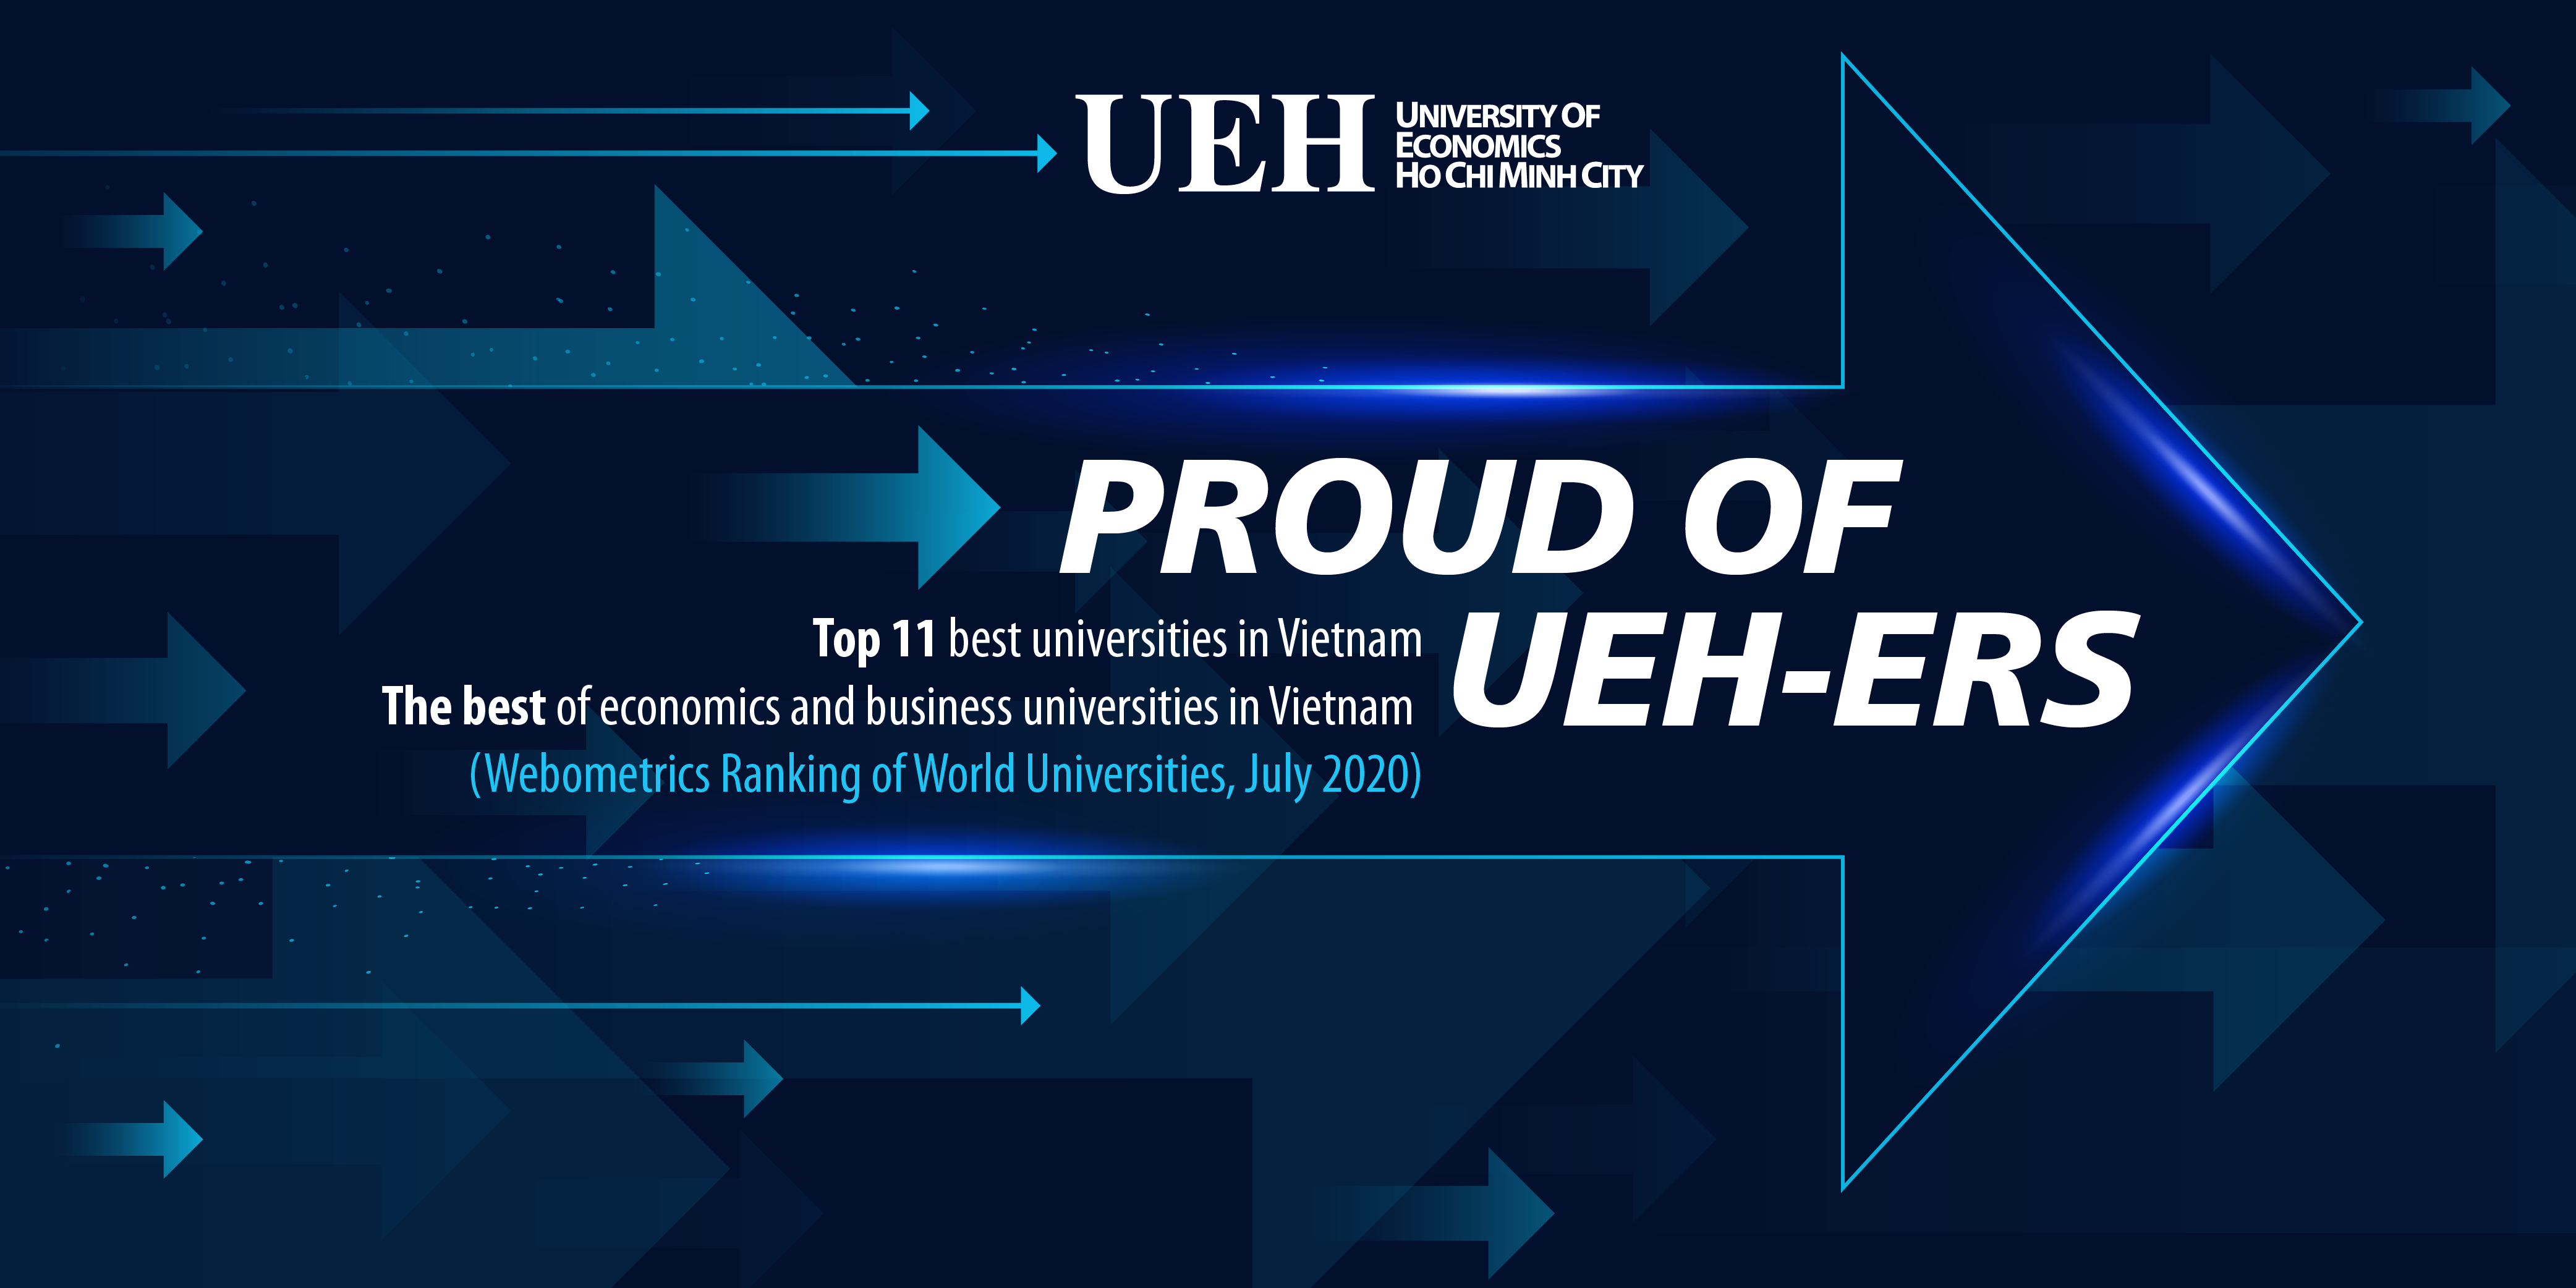 University of Economics Ho Chi Minh City (UEH) has increased by 08 ranks from 19th (in 2019) to 11th (July 2020), ranked first among universities in the field of economics and business in Vietnam according to the latest Webometrics Ranking. 